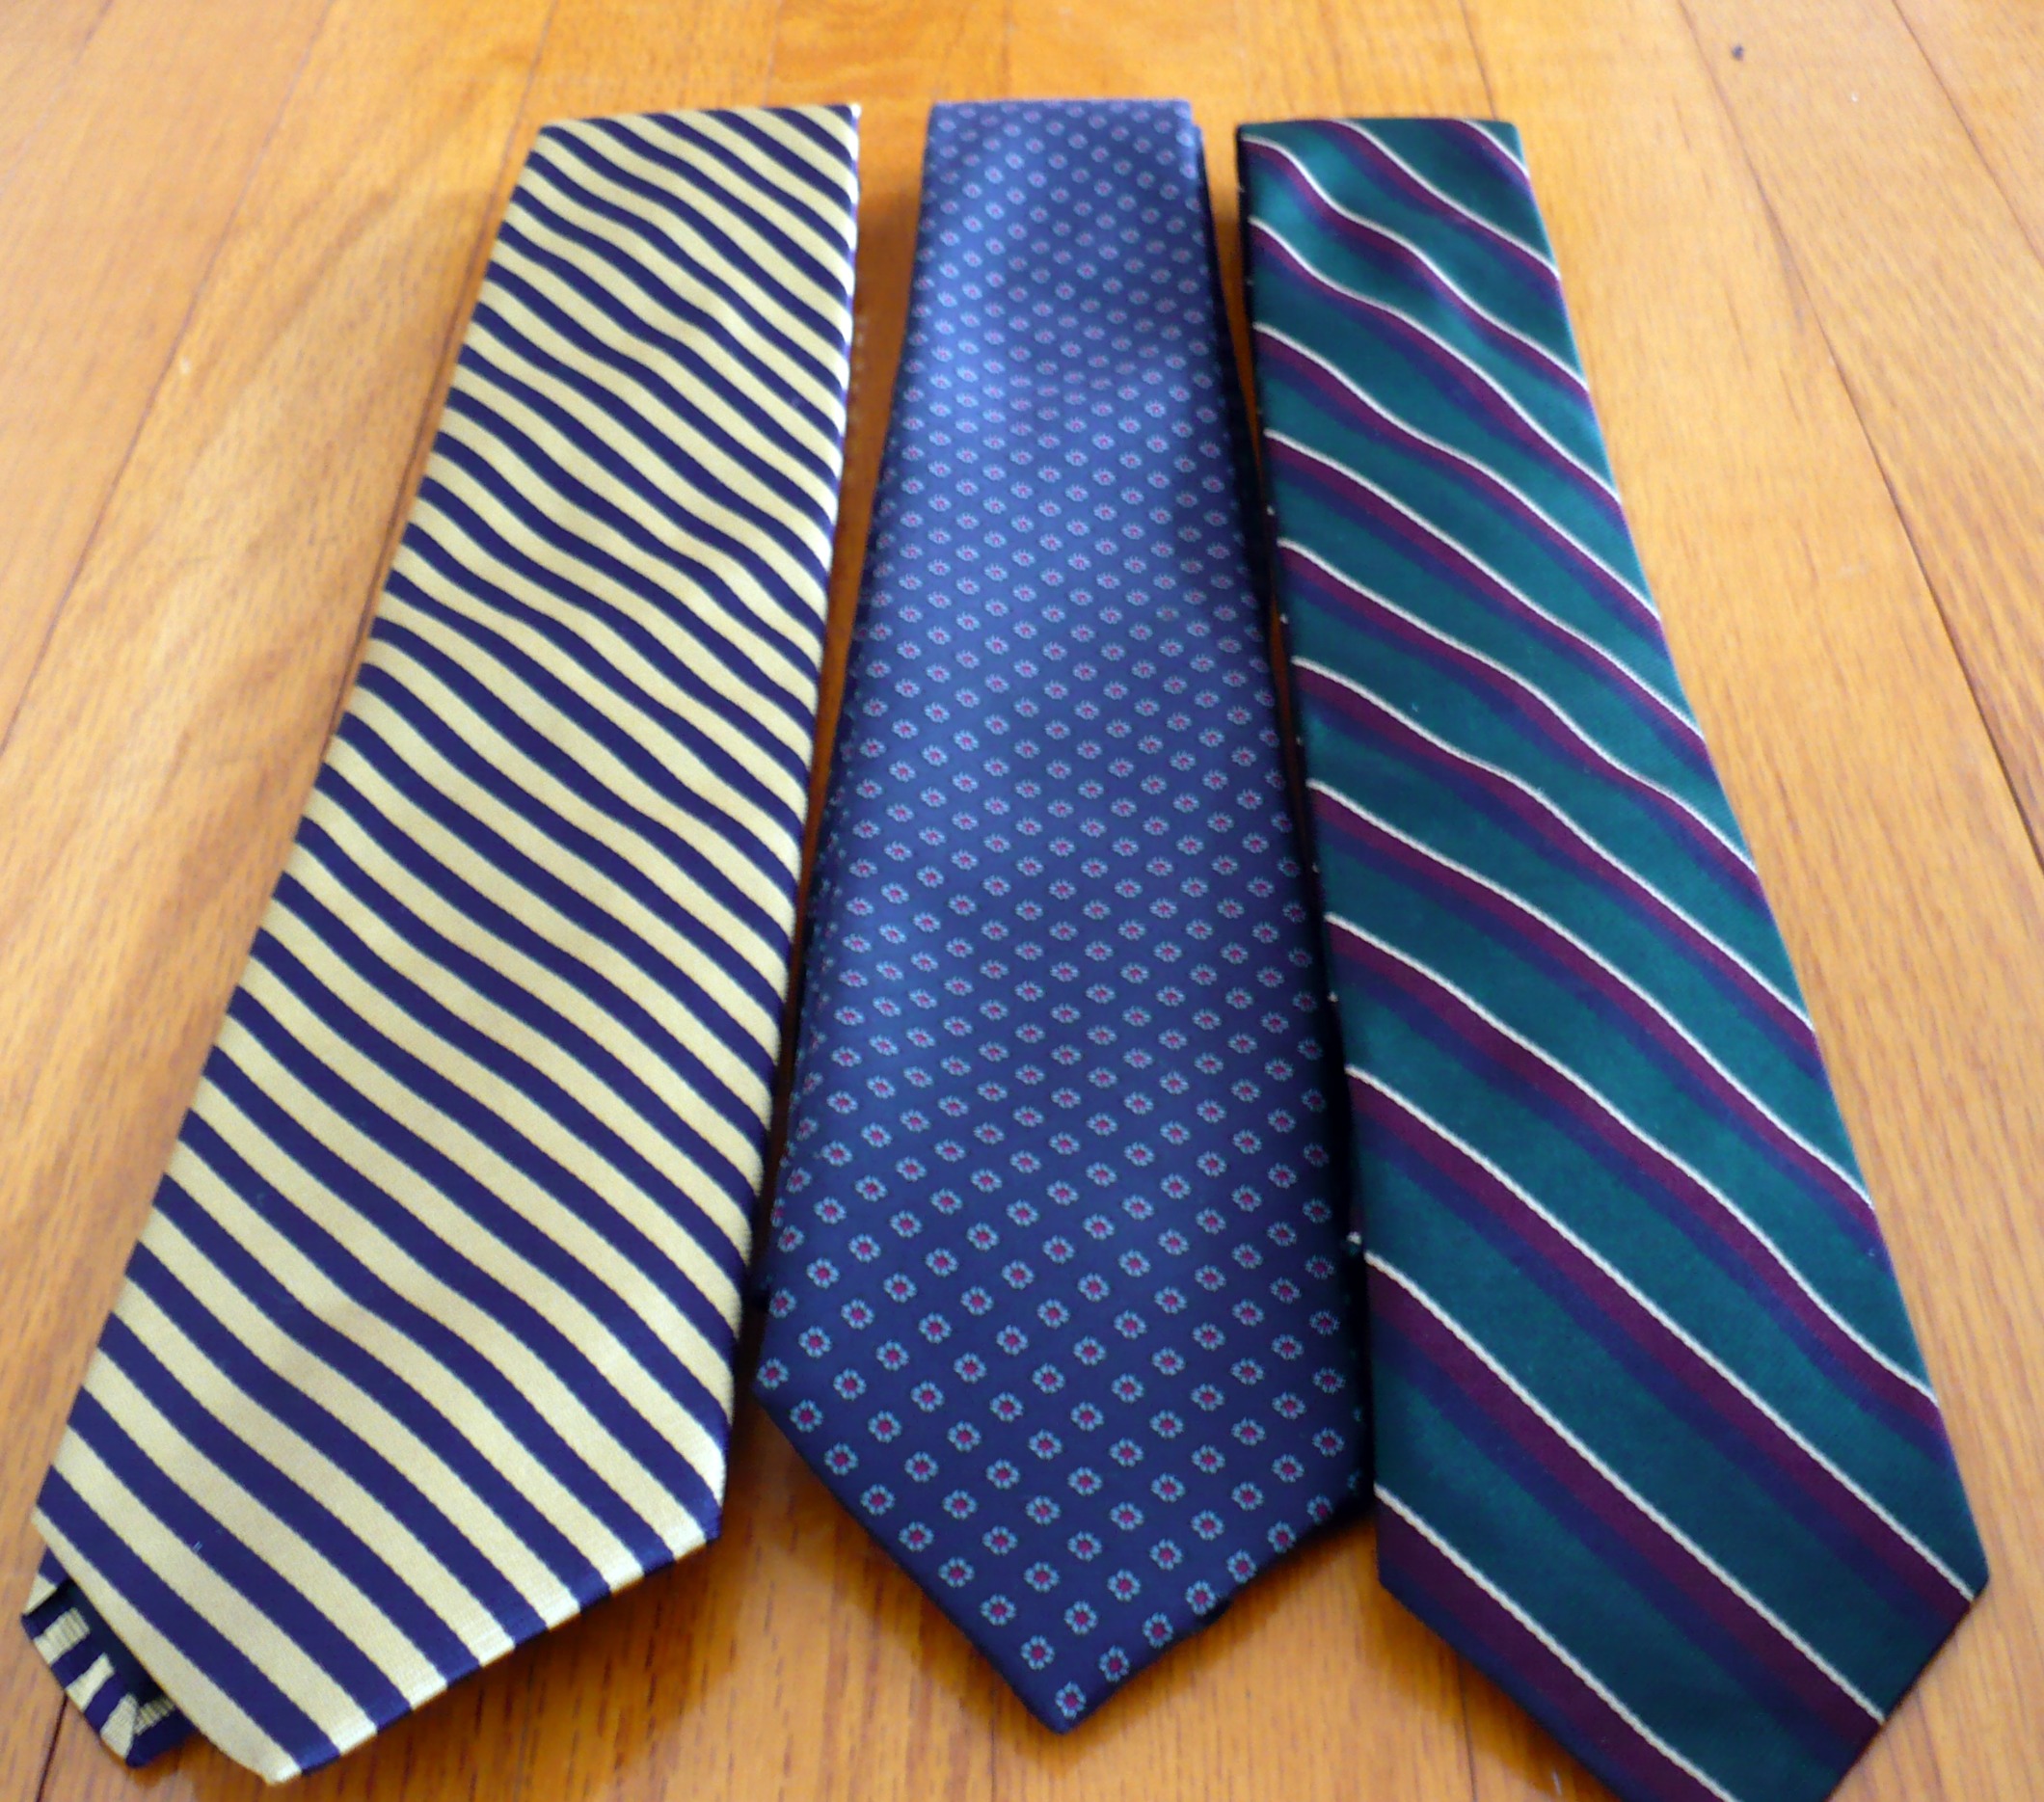 Ask Andy's Trad Community: The Tie Swap Box